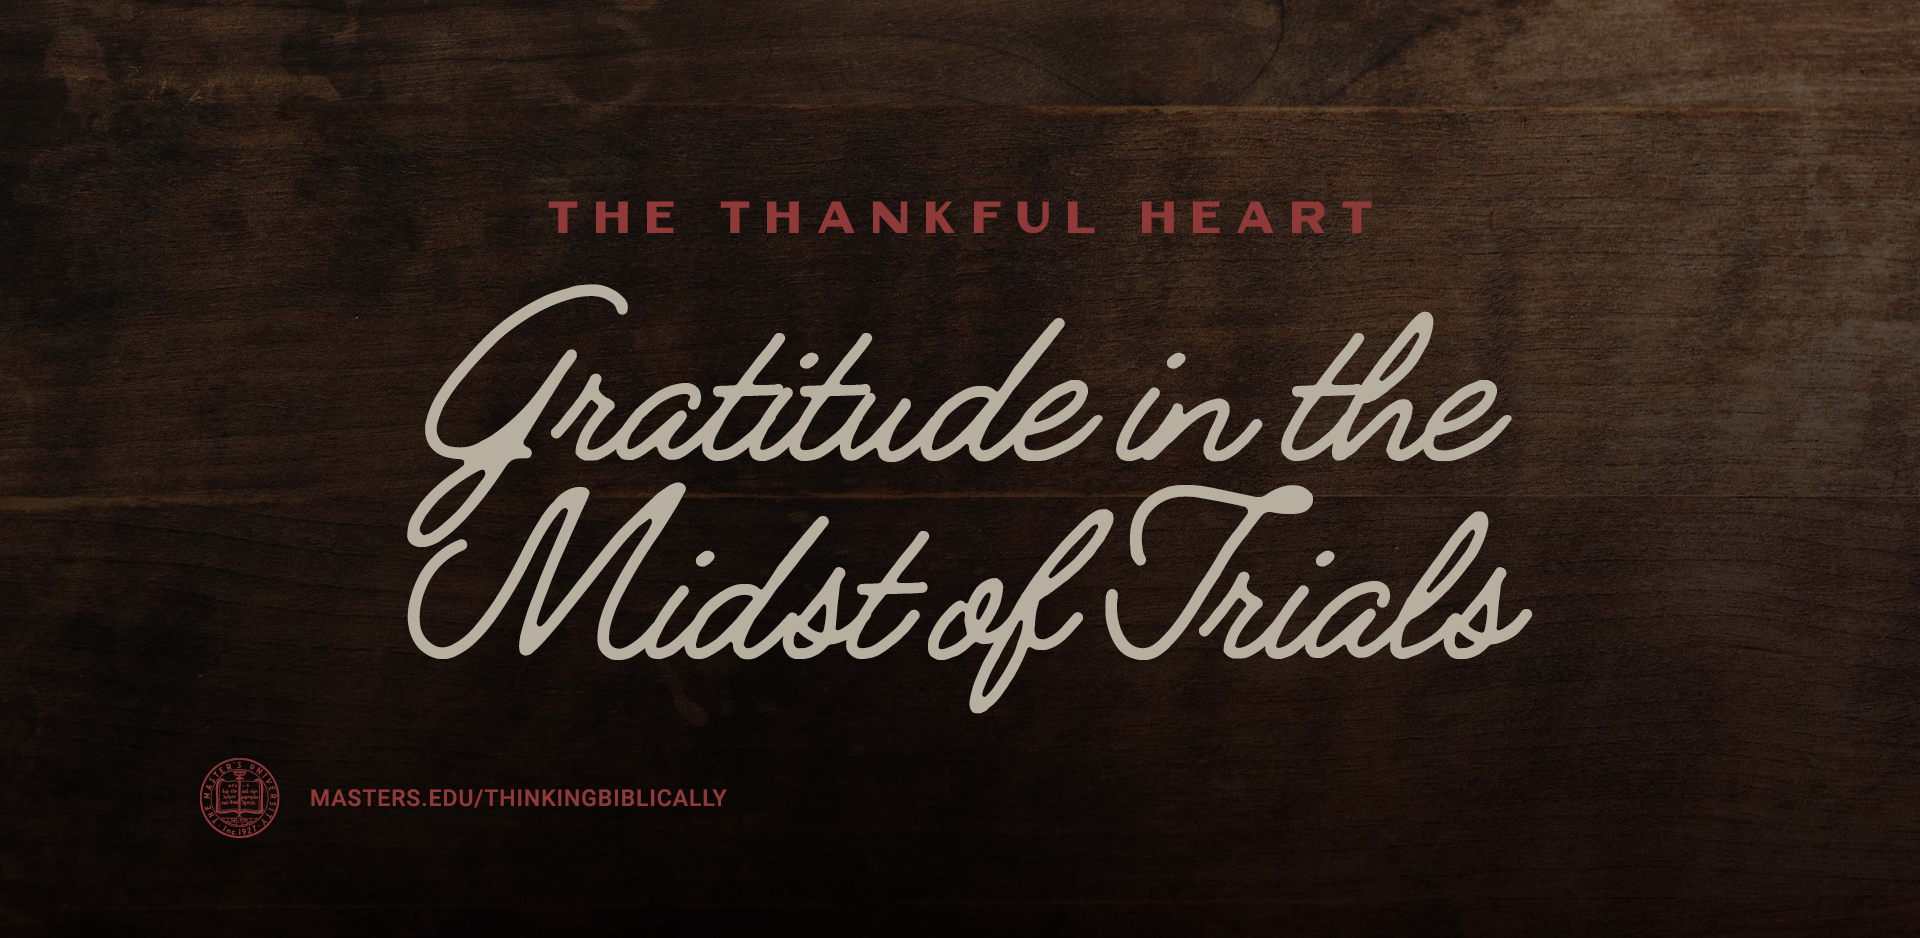 Gratitude in the Midst of Trials Featured Image